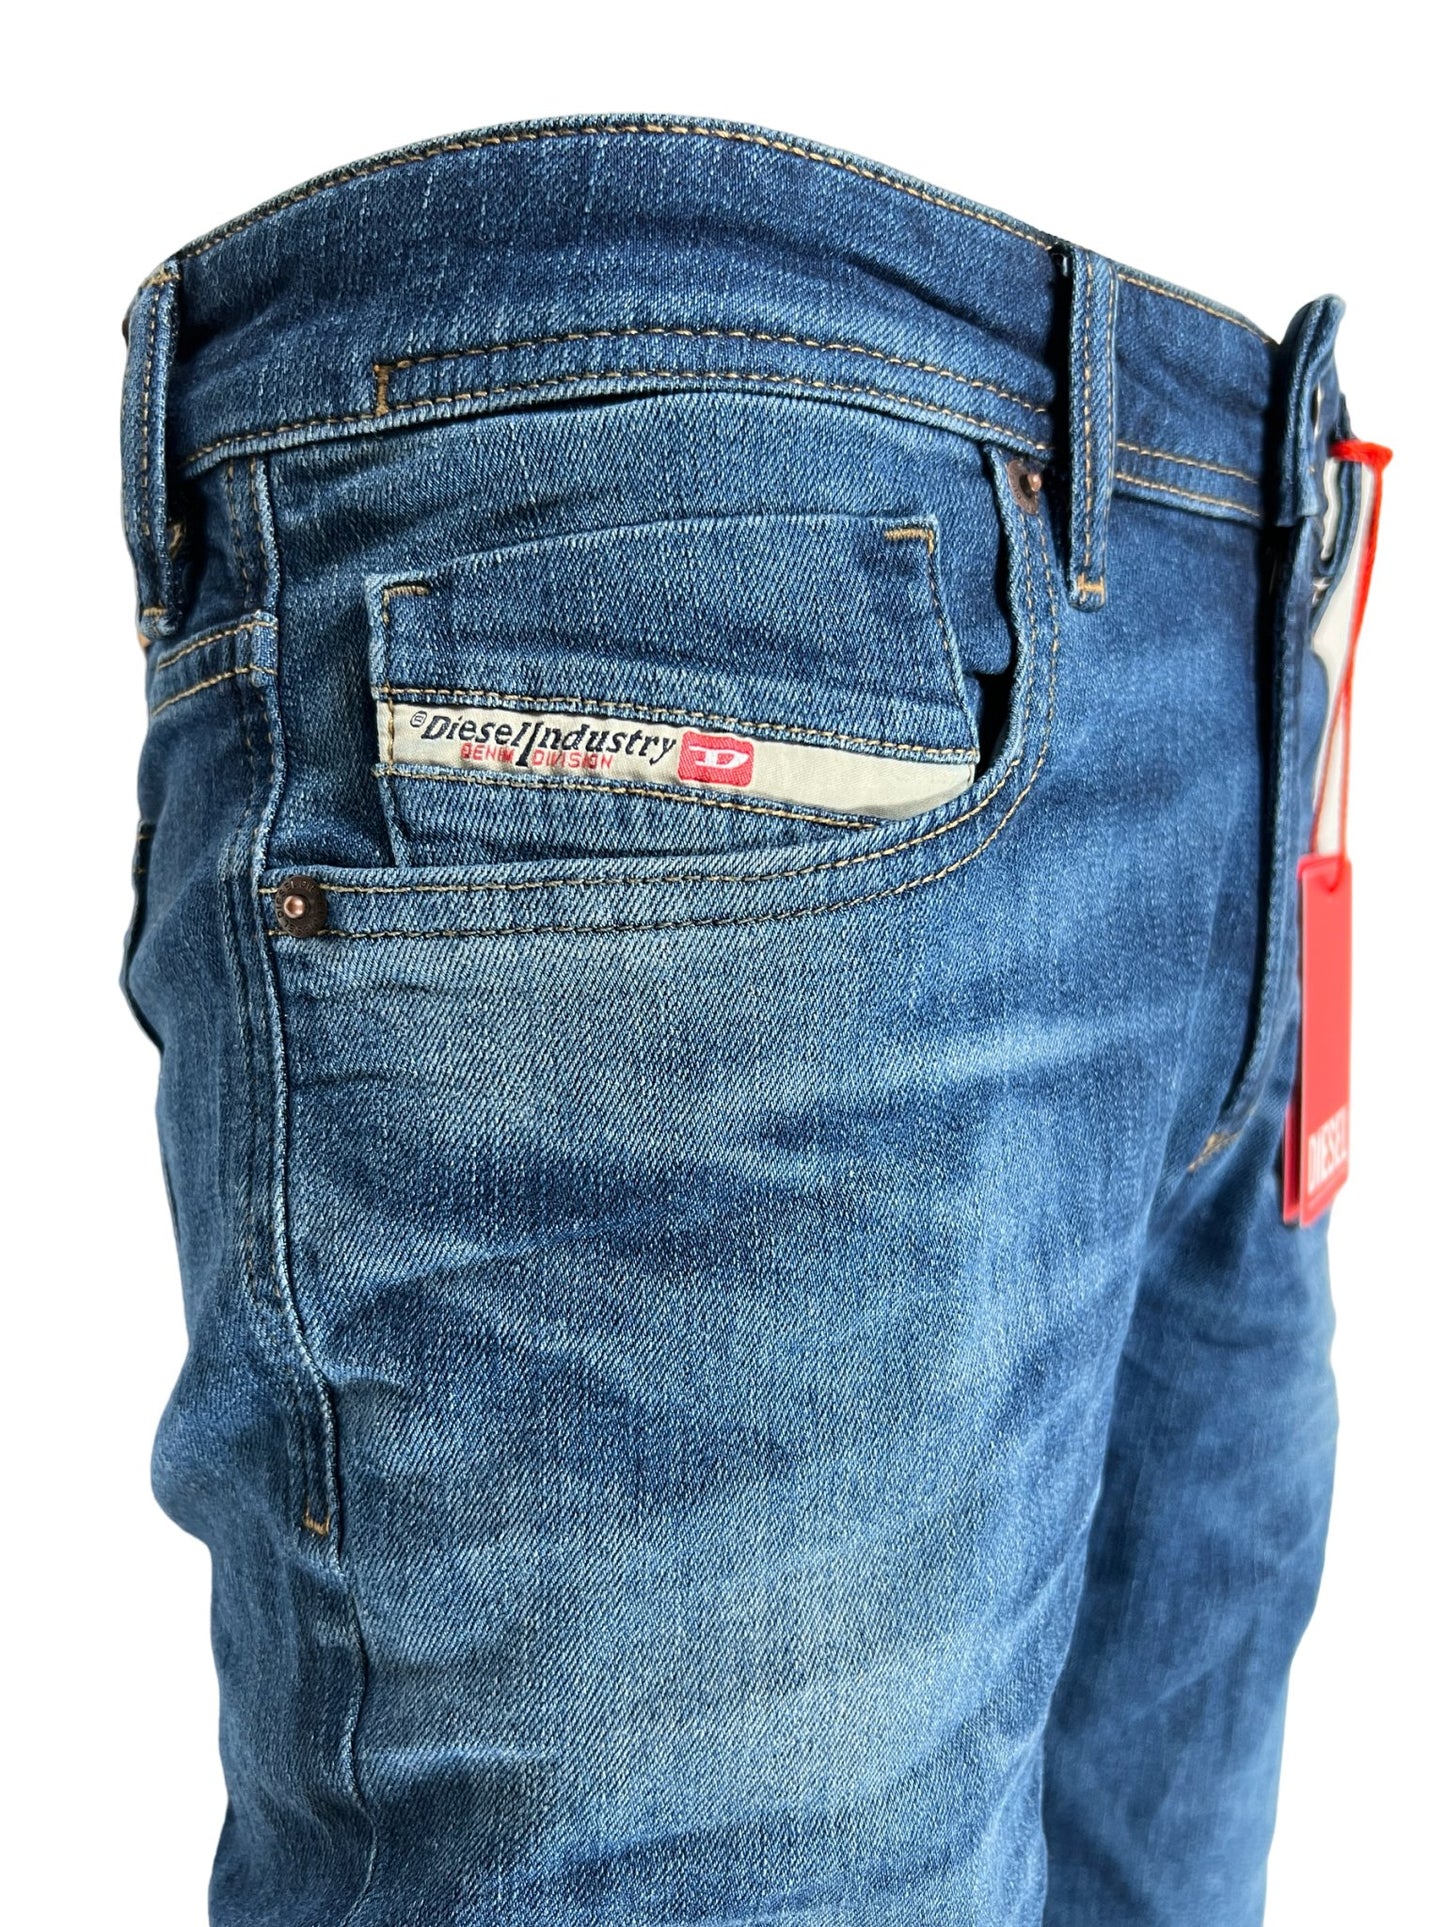 A pair of Diesel blue stretch denim jeans with a tag on the pocket.